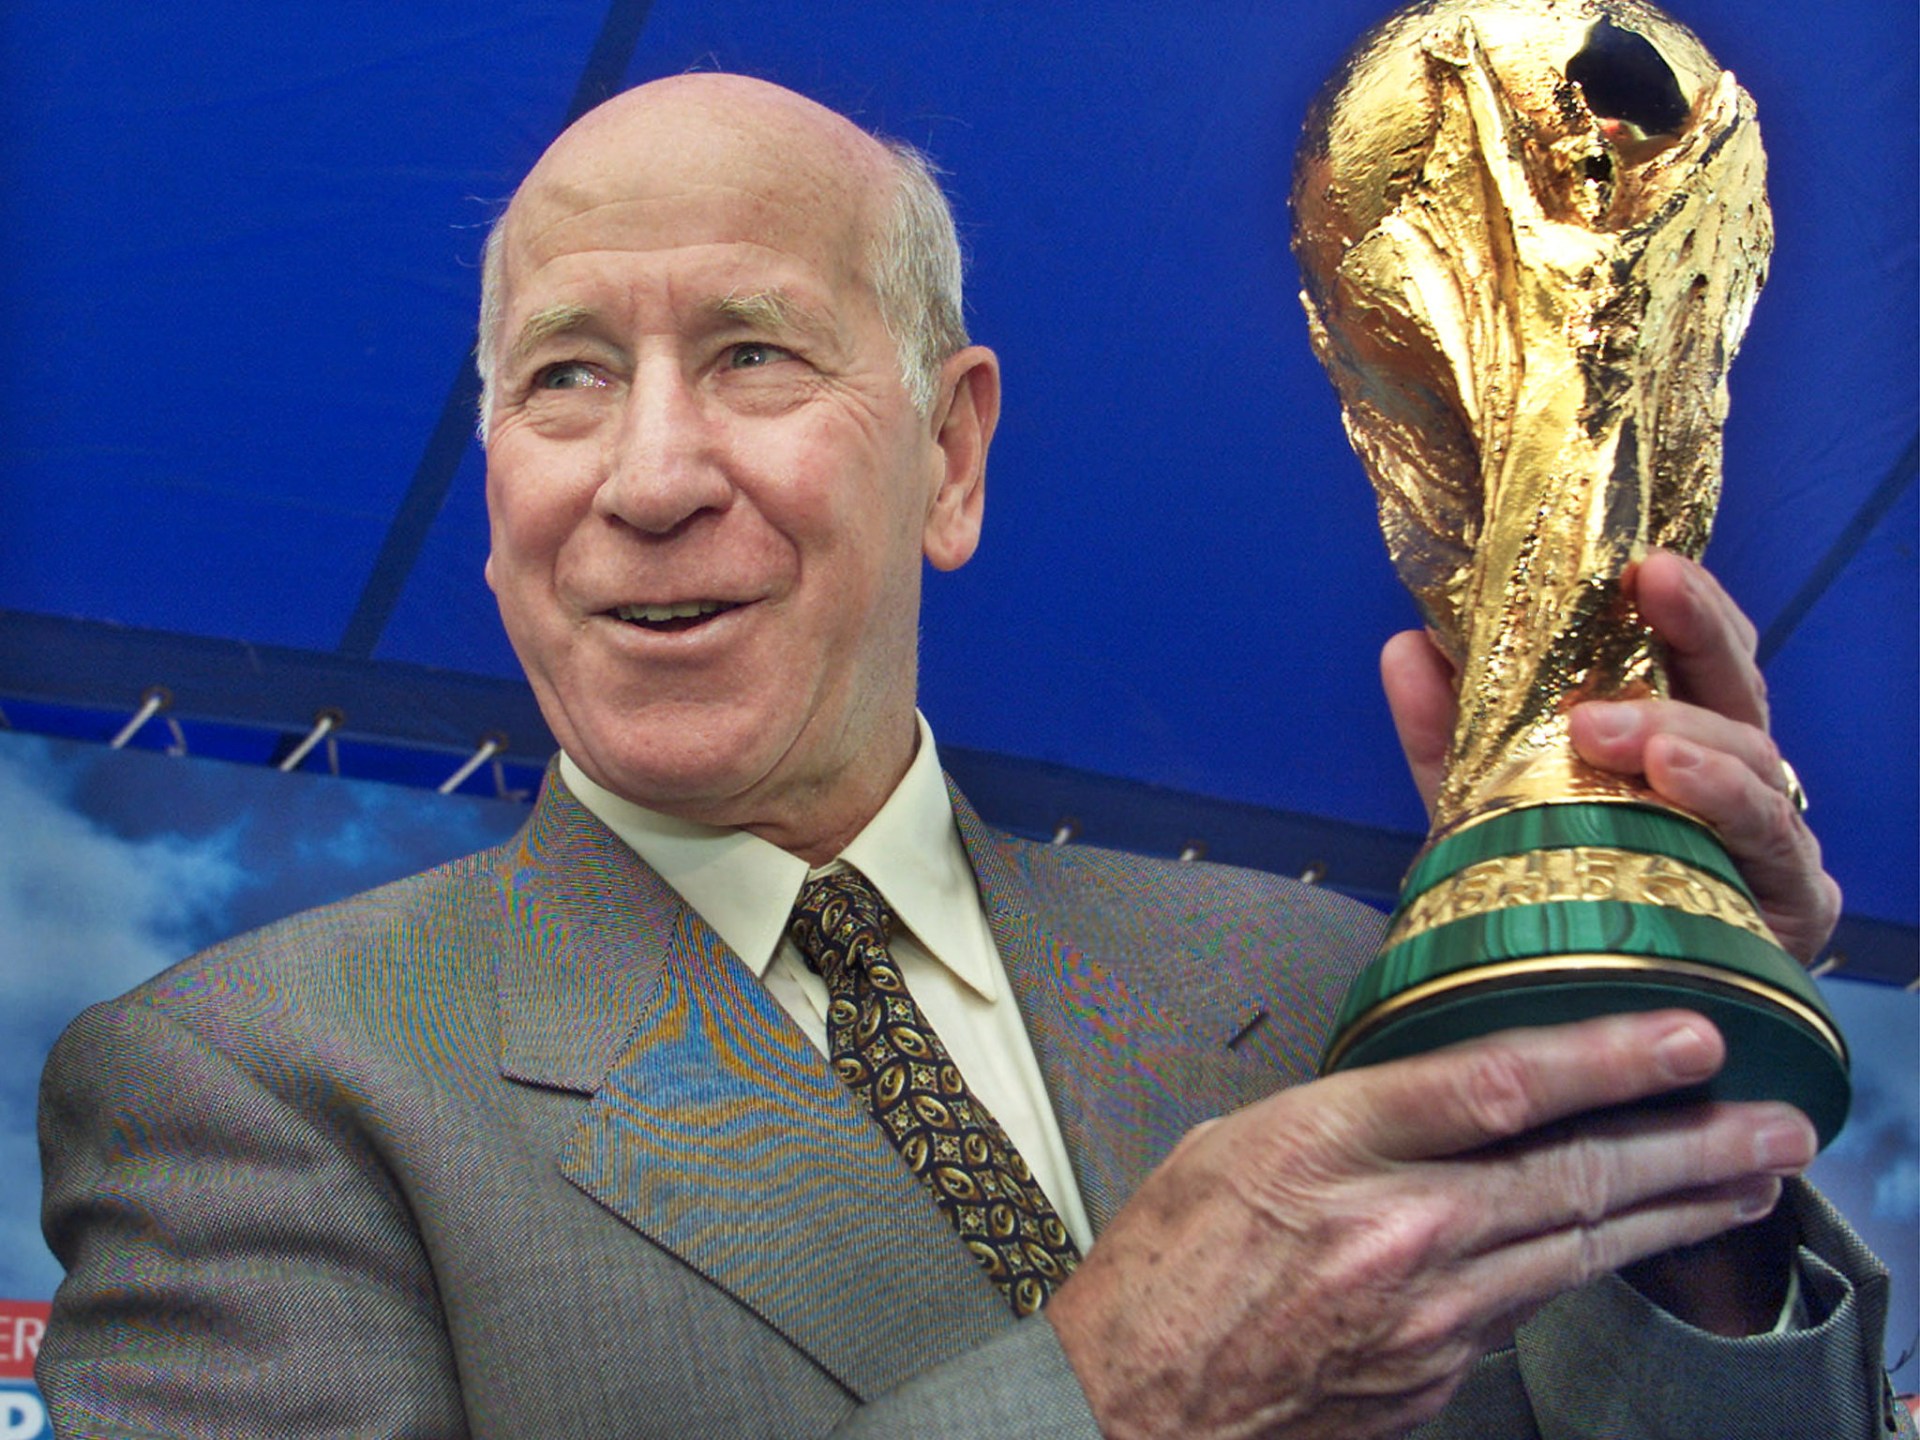 Bobby Charlton, Manchester United and England legend, dies aged 86